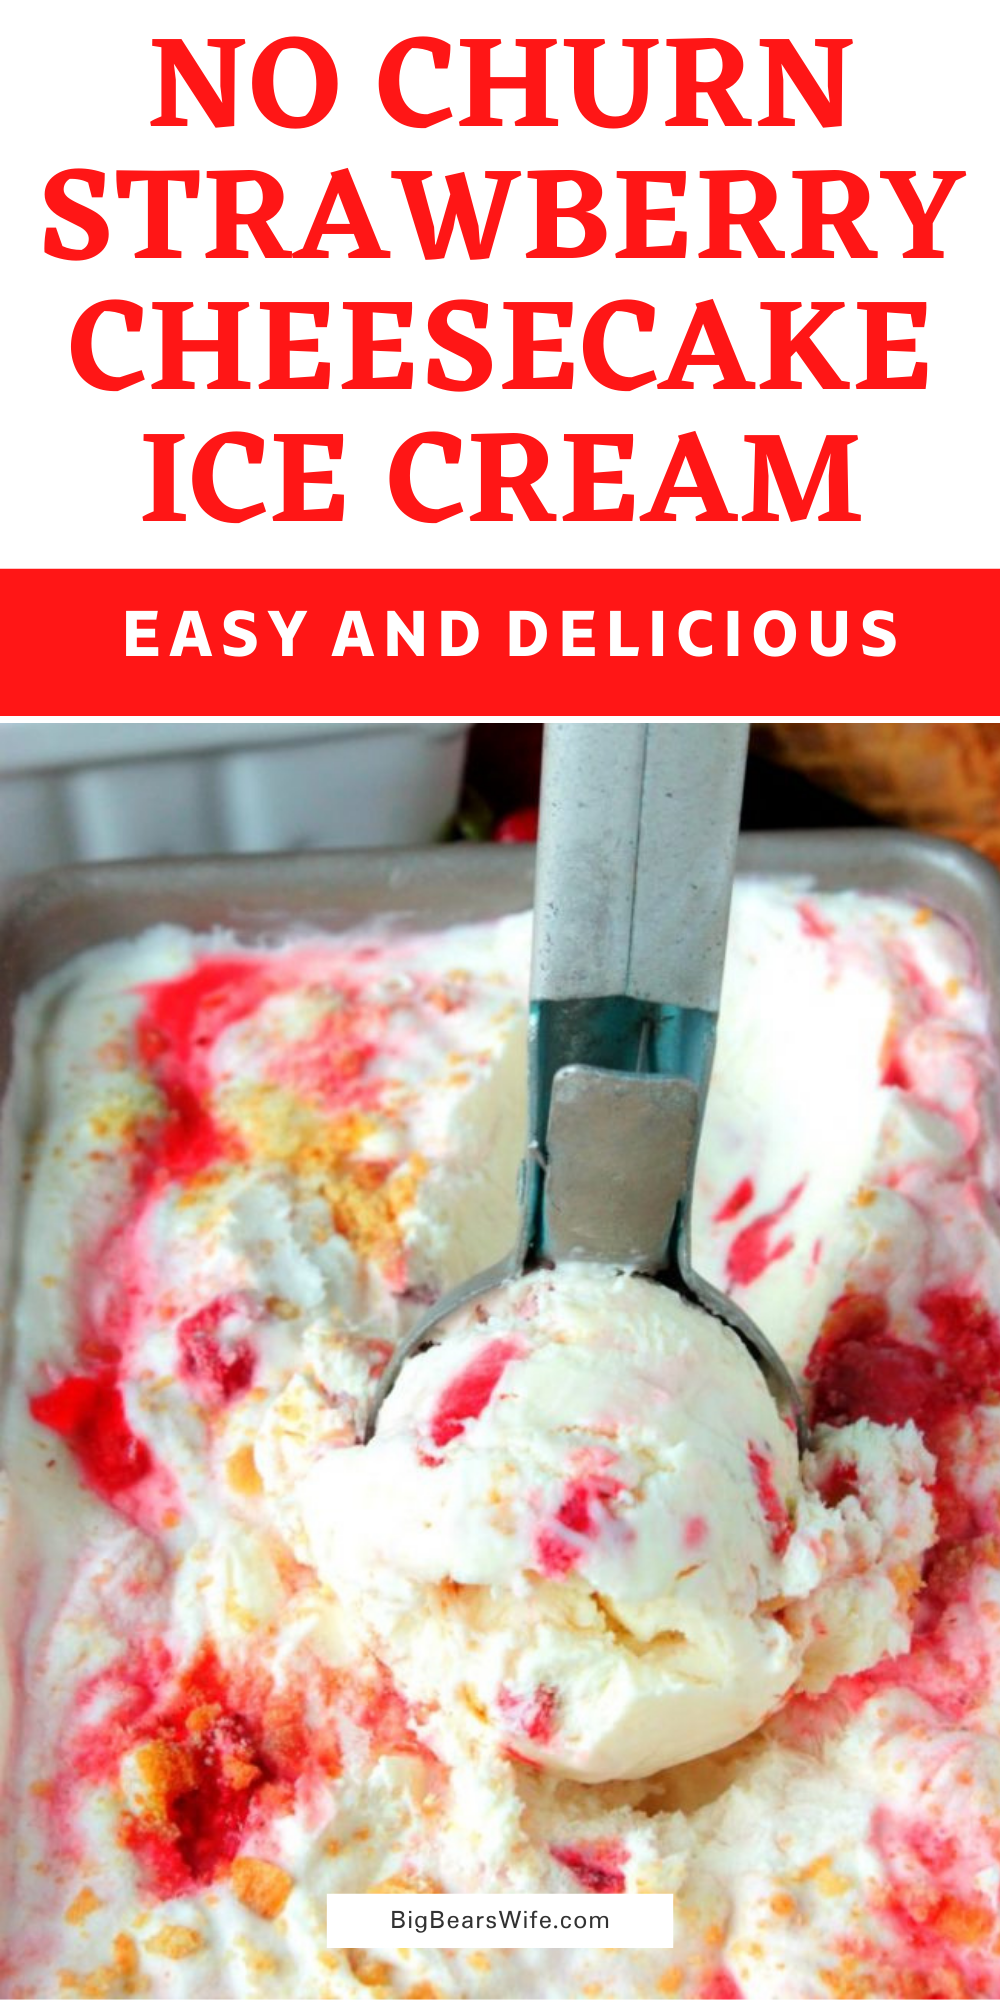 This No Churn Strawberry Cheesecake Ice Cream is the perfect combo of homemade Strawberry Cheesecake and ice cream blended into creamy frozen dessert! It's irresistible!  via @bigbearswife